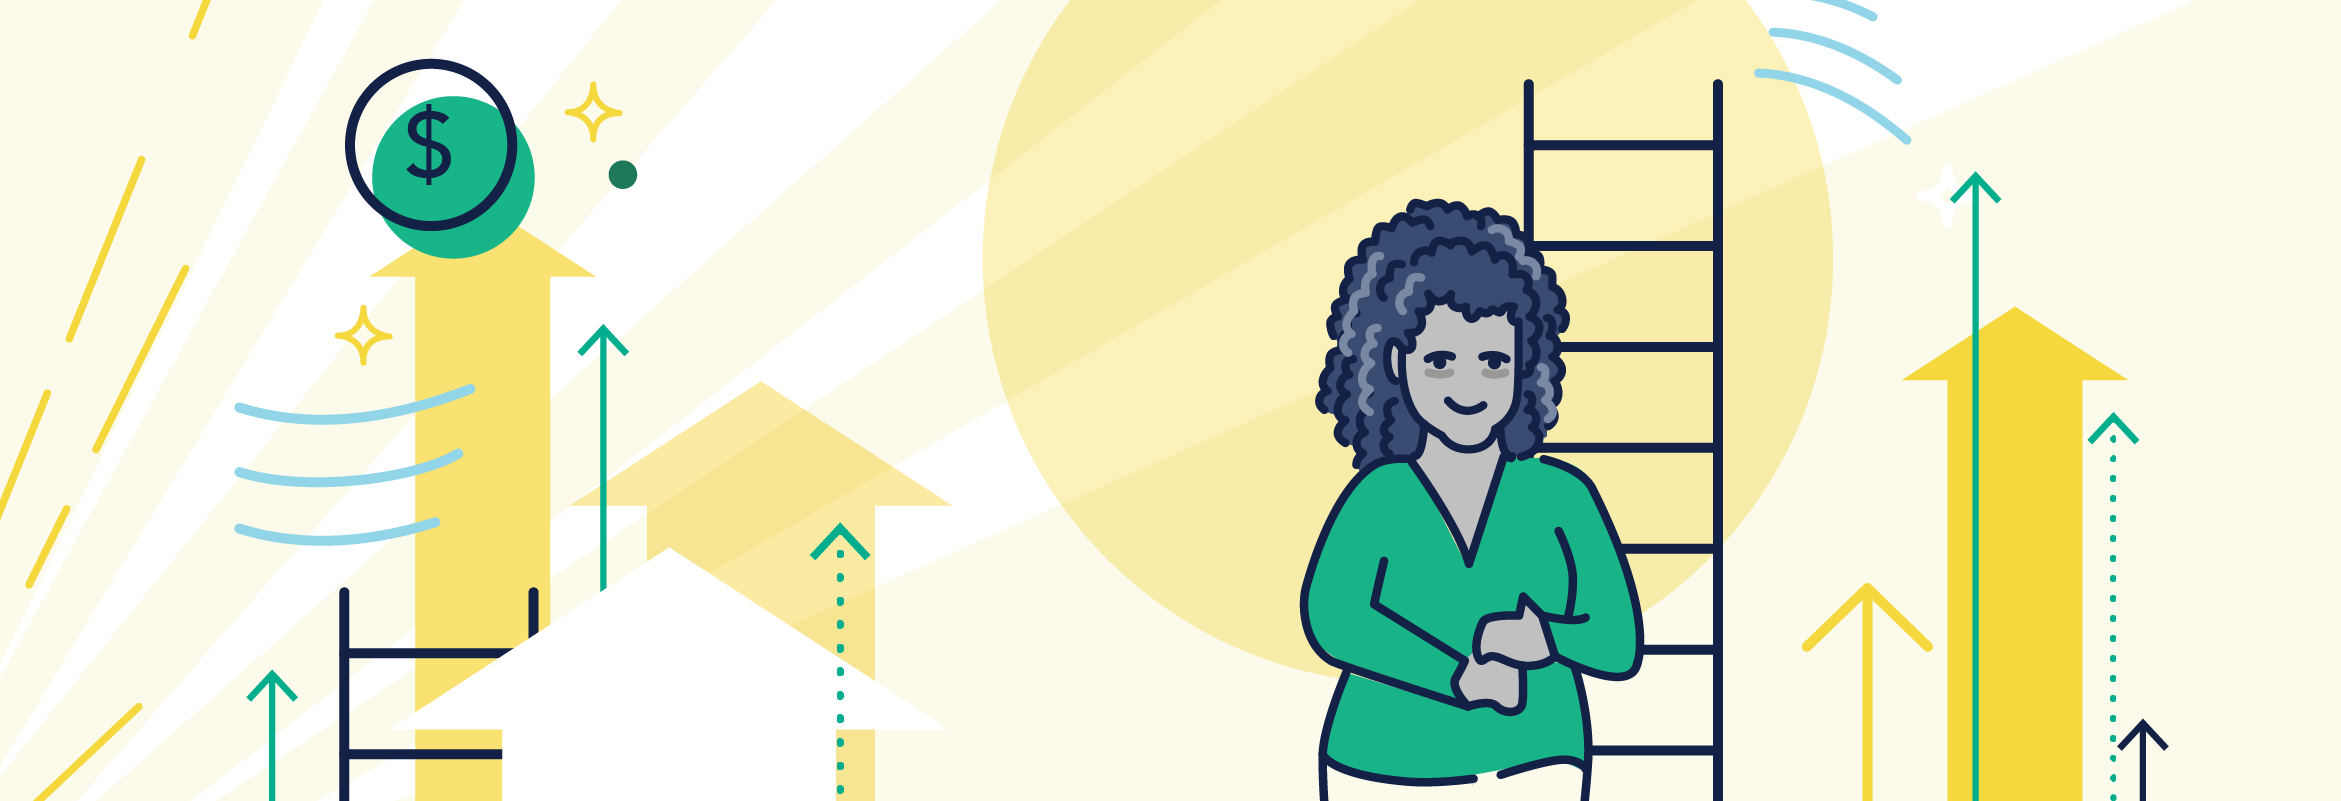 Woman in green shirt stands next to a ladder and is surrounded by arrows pointed up. A USD currency sign is to her left. The image is intended to convey the power of upskilling to allow for greater financial freedom and upward employment mobility.